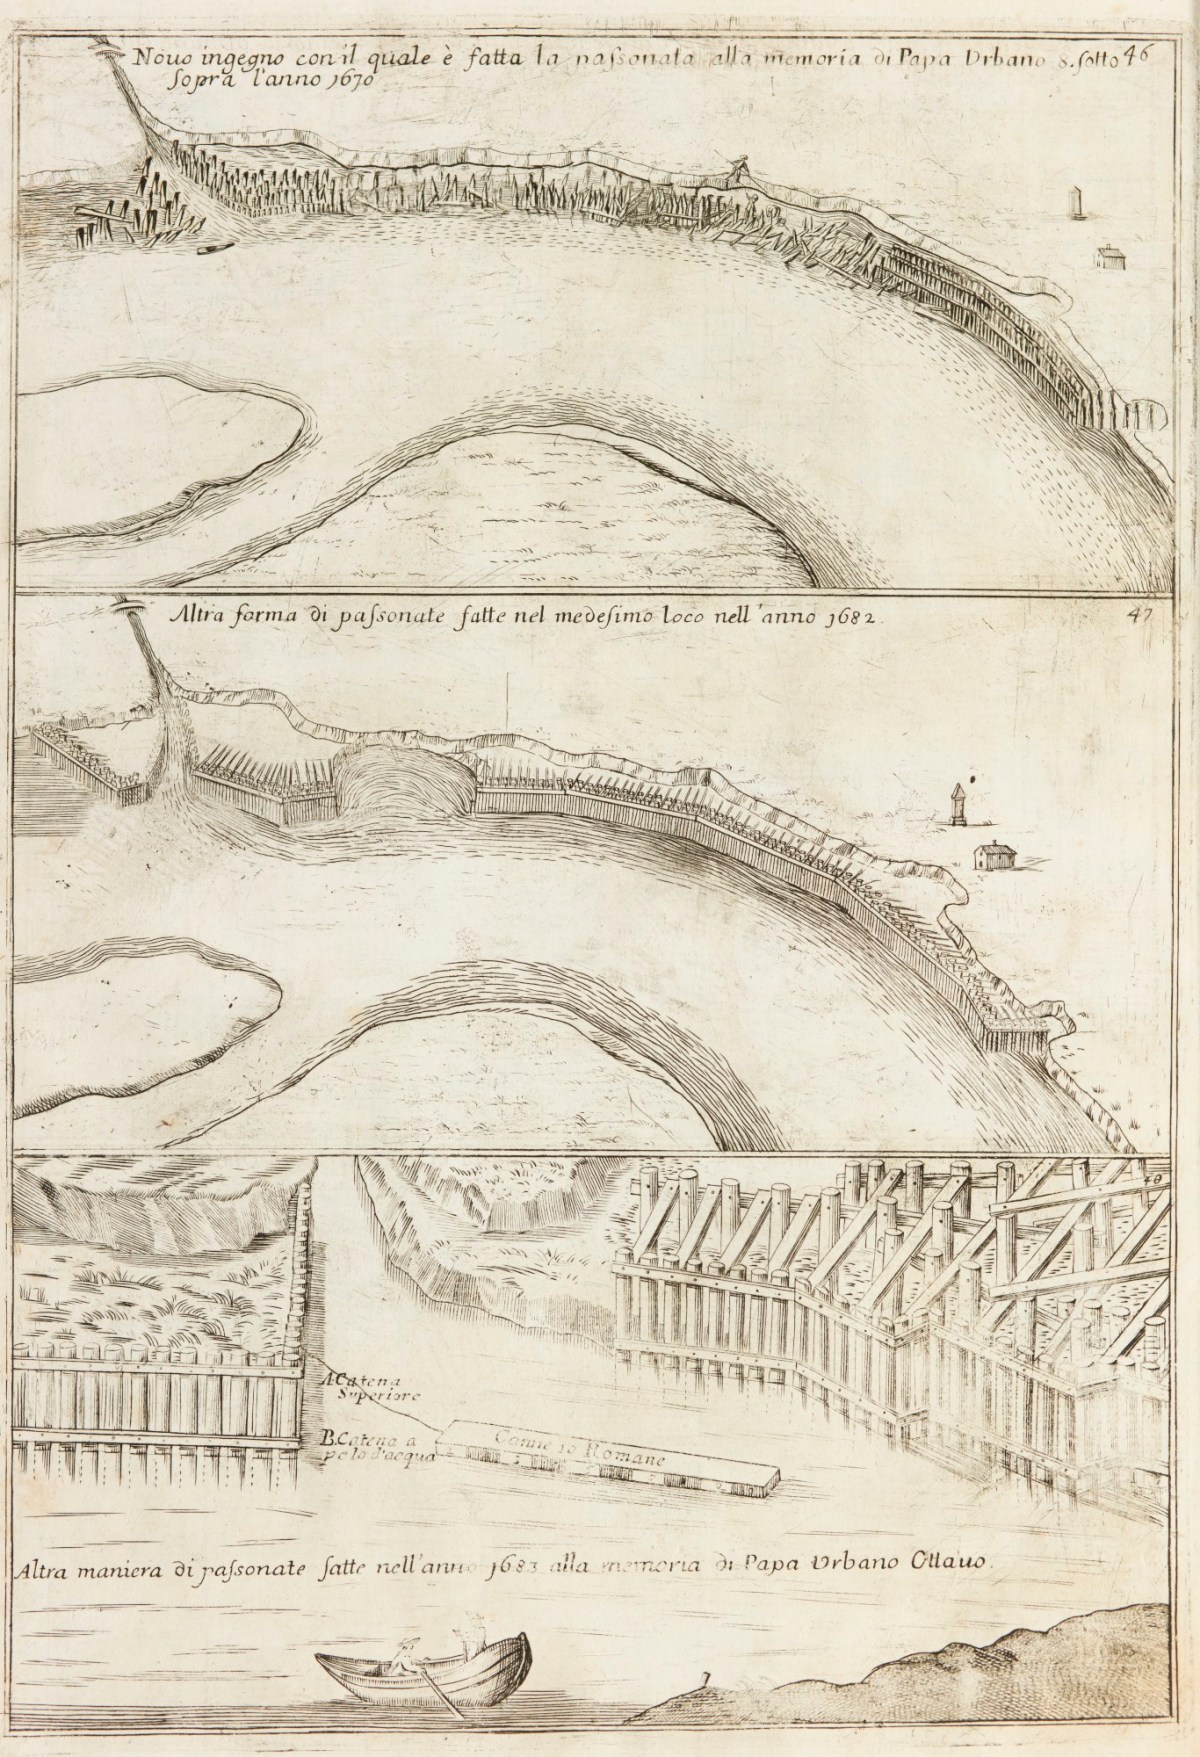 Three Plates Illustrating Mejjer S Passonata Or Embankment Solution To The Tiber Flooding Proposed And Executed Under Pope Urban Viii Works Of Art Ra Collection Royal Academy Of Arts